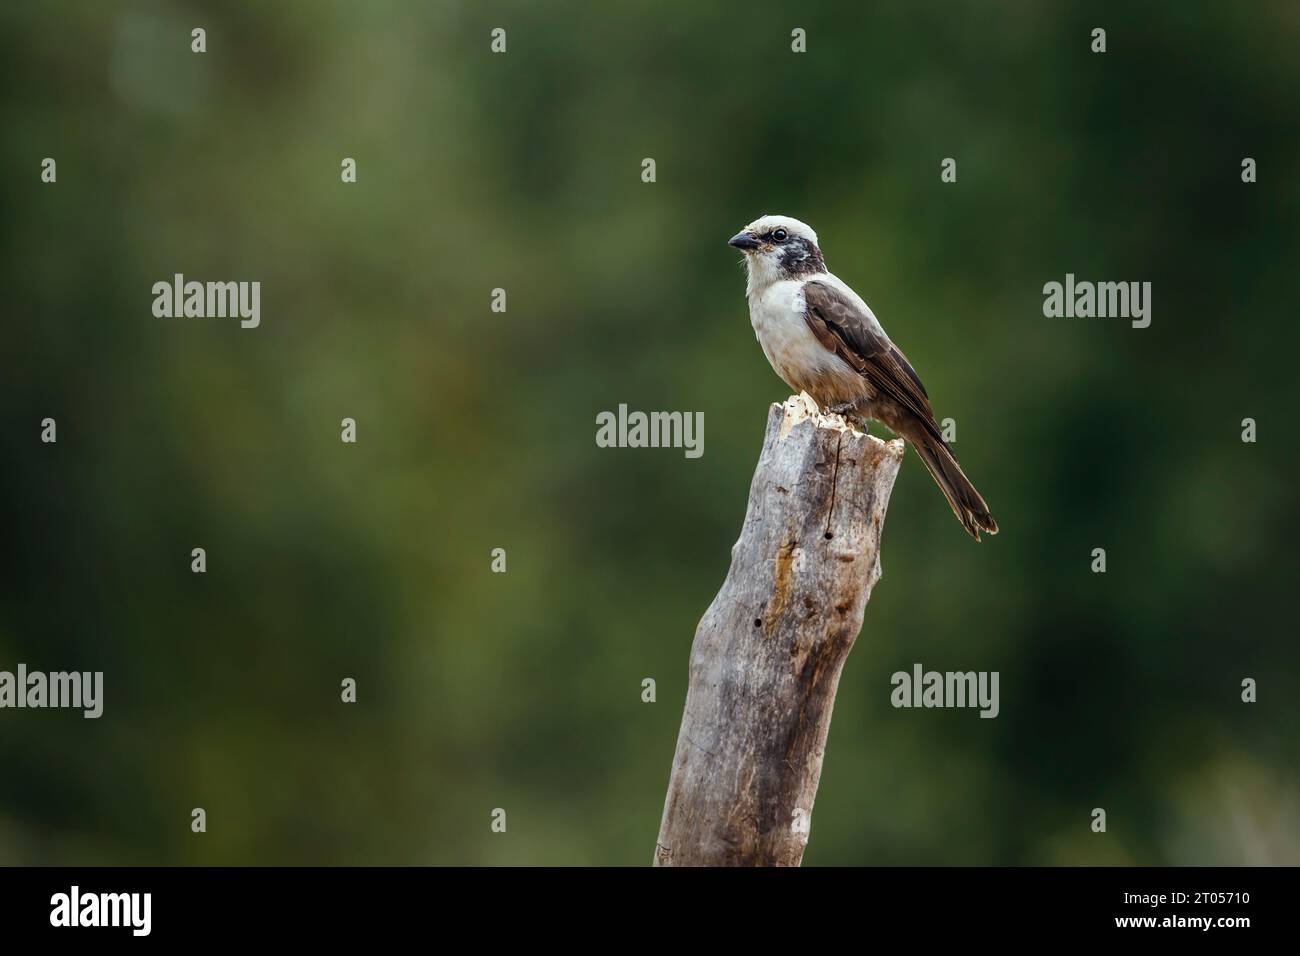 White crowned Shrike standing on a log isolated in natural background in Kruger National park, South Africa ; Specie Eurocephalus anguitimens family o Stock Photo